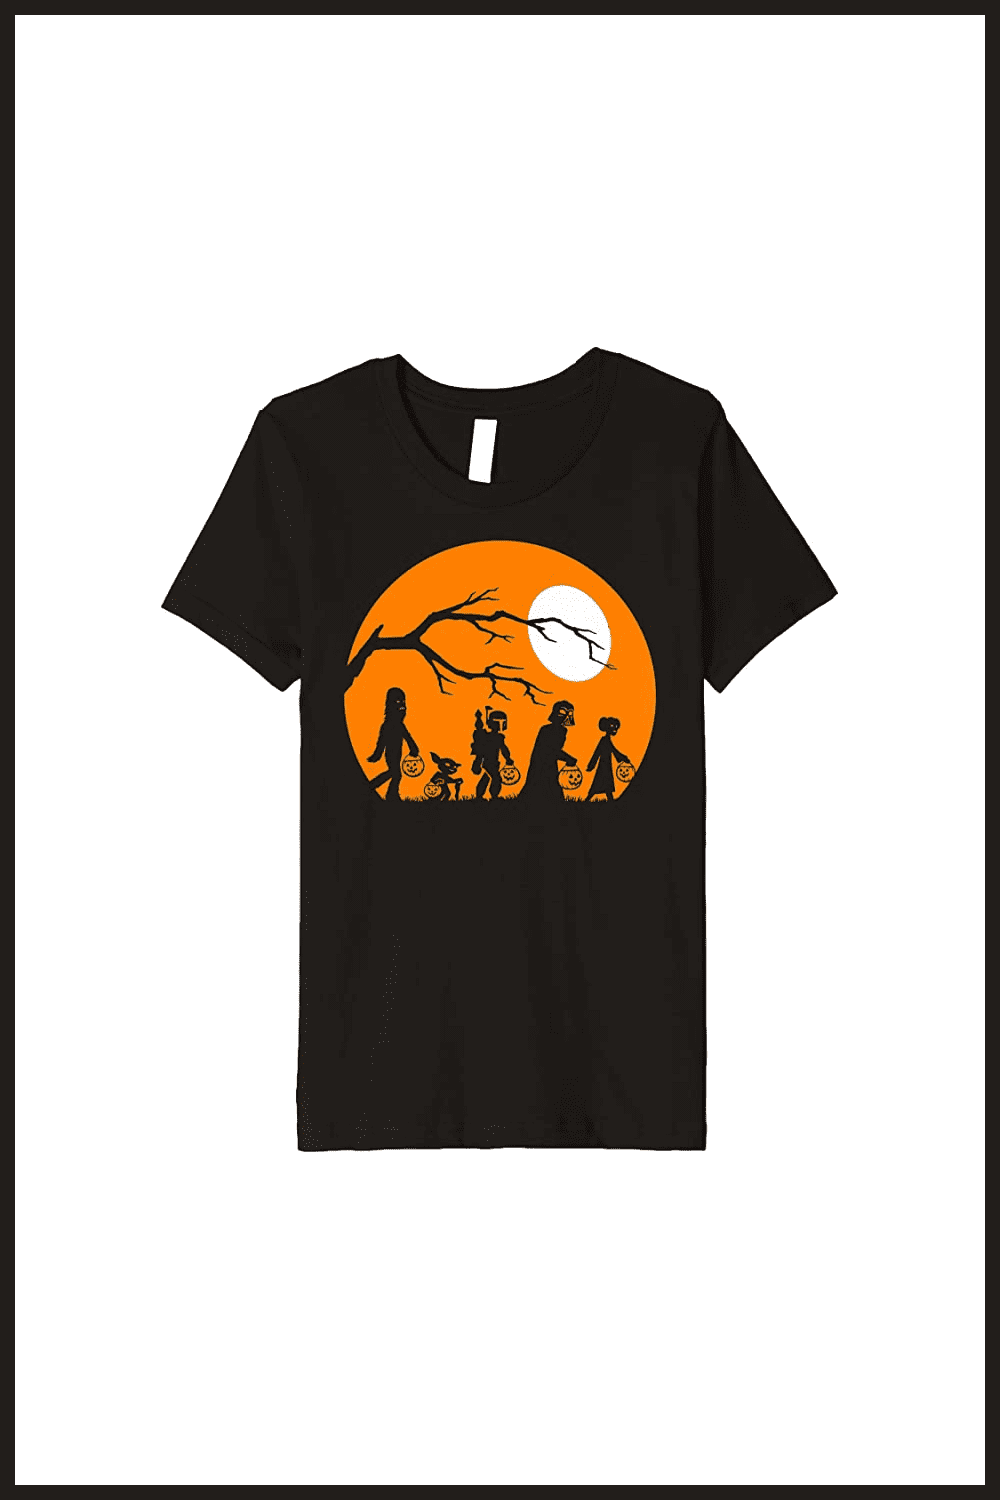 Black T-shirt with Star Wars characters on an orange background.